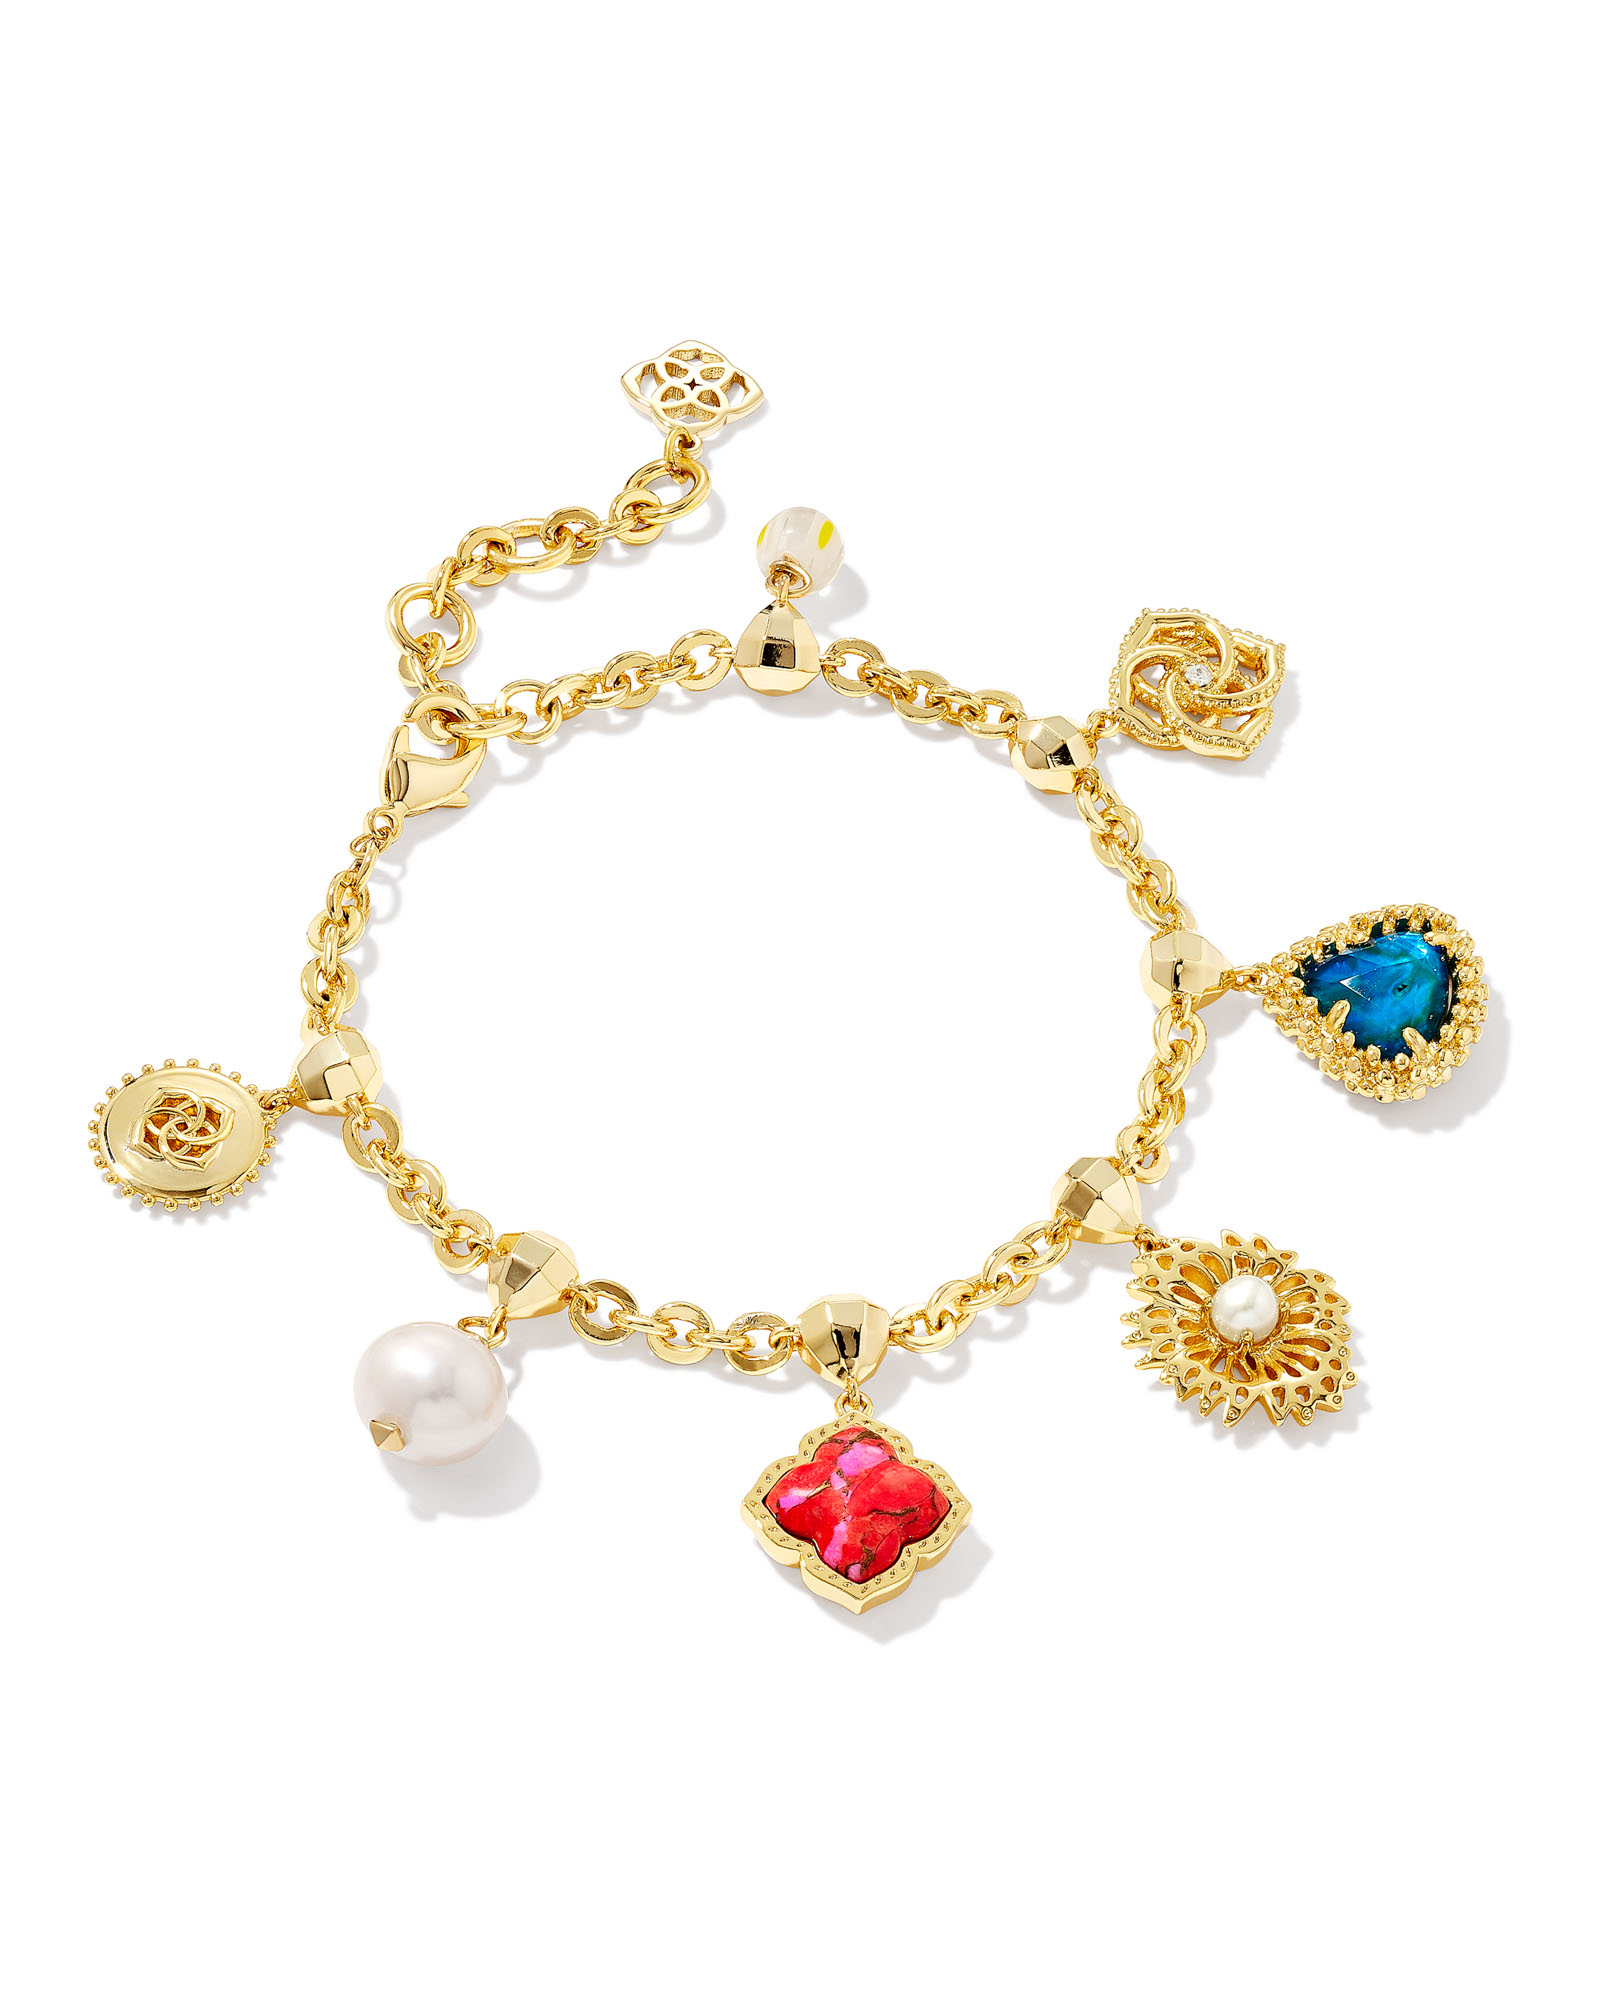 Gold charm bracelet are timeless and versatile accessories that hold special significance for many individuals.